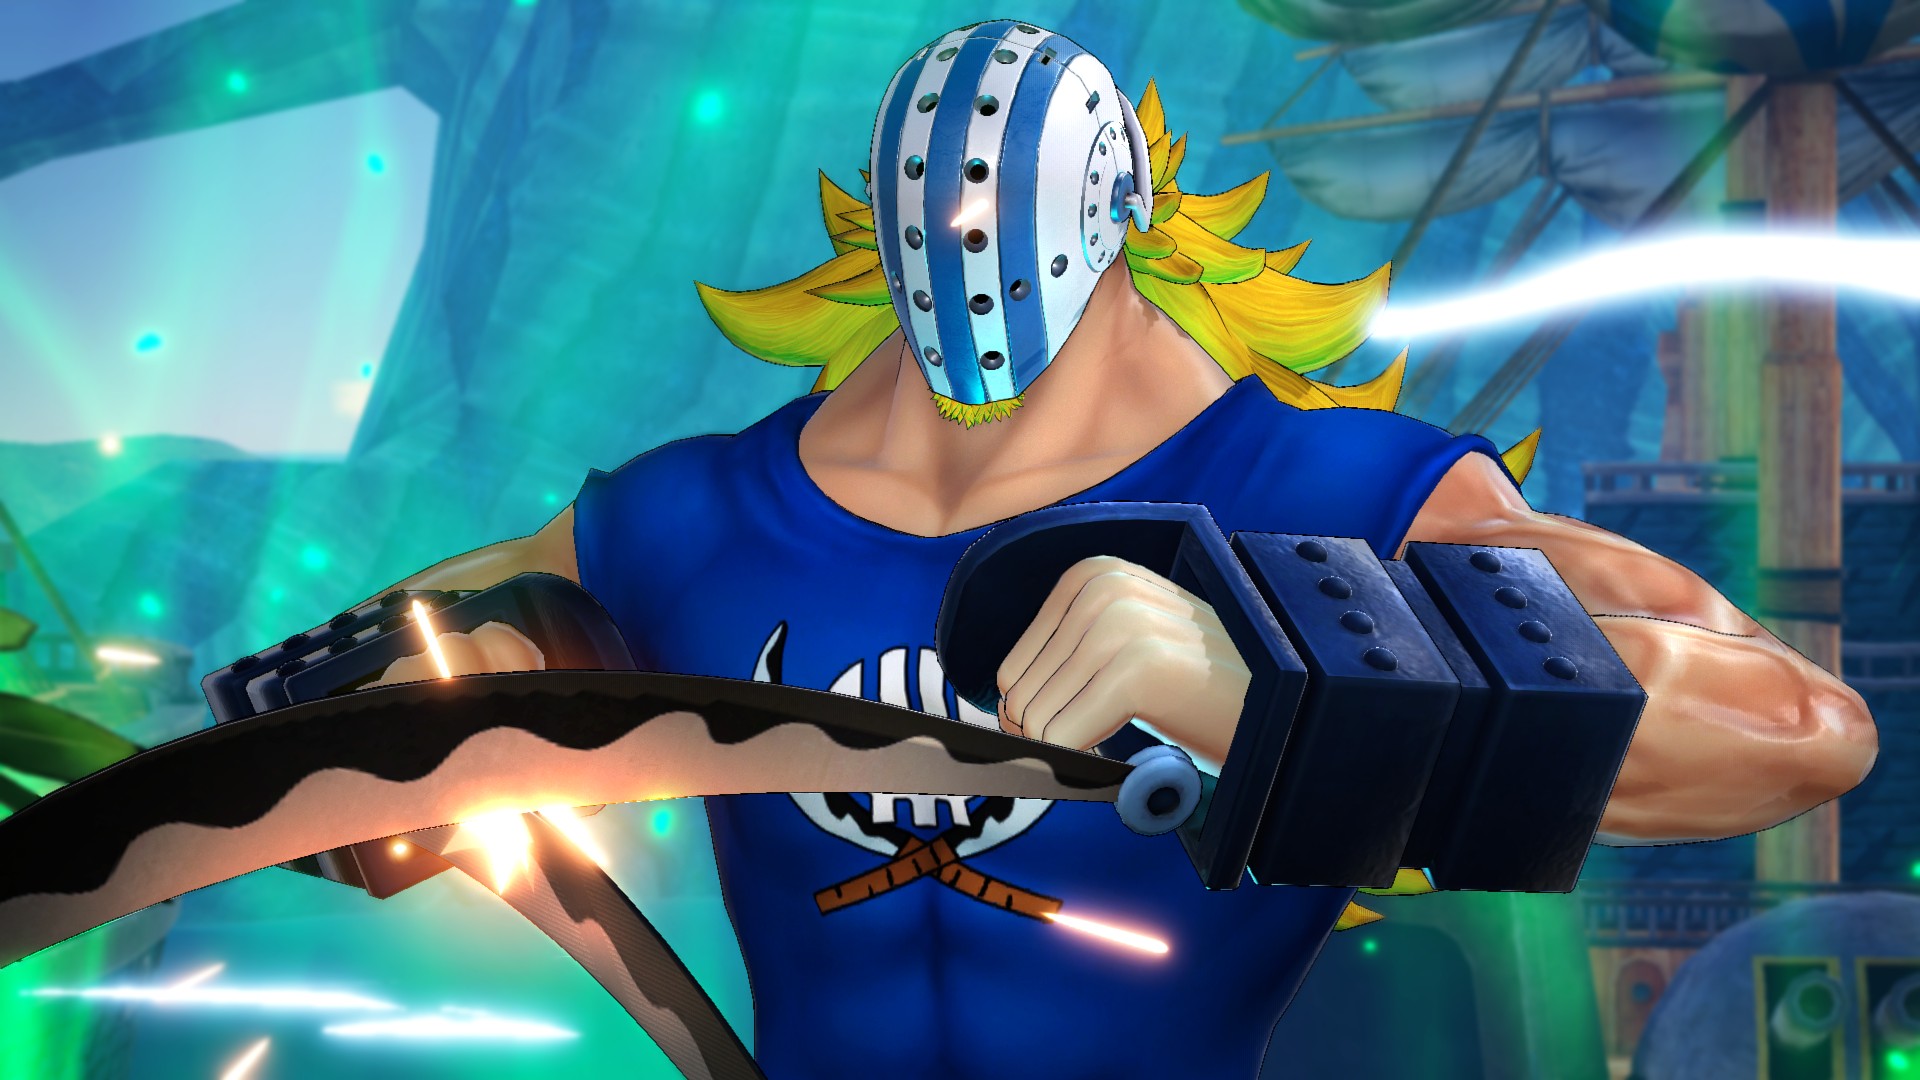 Announcing Killer, The New Combatant In The Second Character Pack Of One Piece Pirate Warriors 4